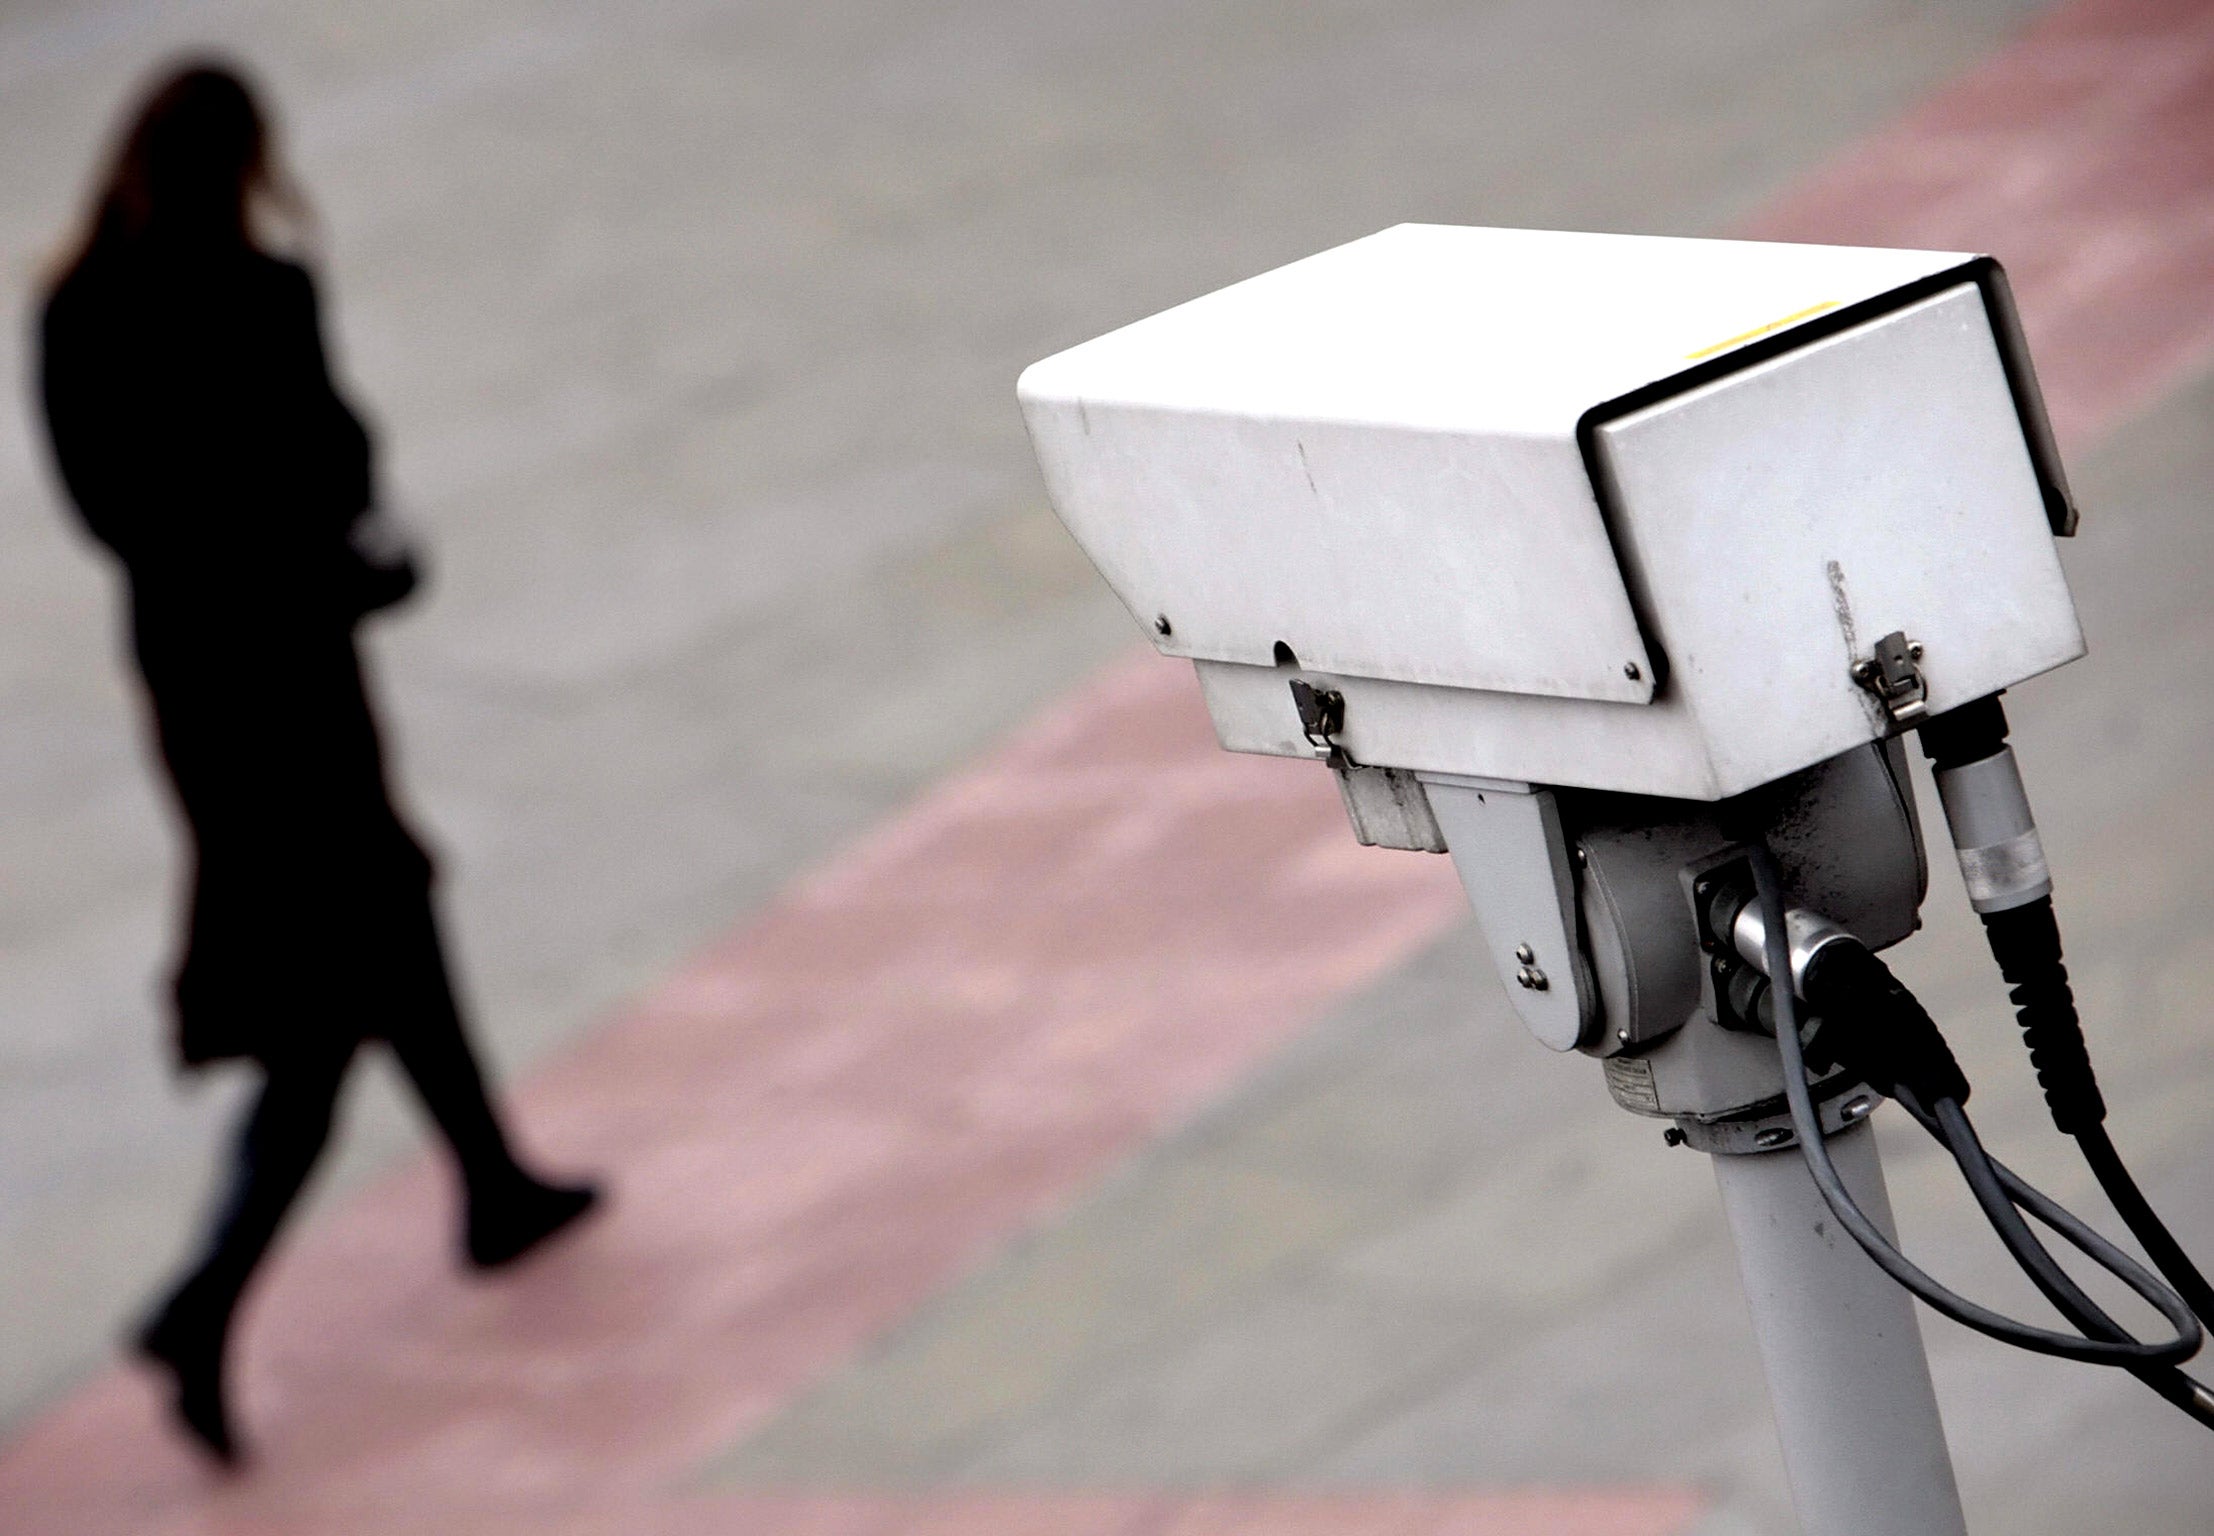 CCTV cameras in towns and cities across the country are being switched off by councils who cannot afford to keep them running